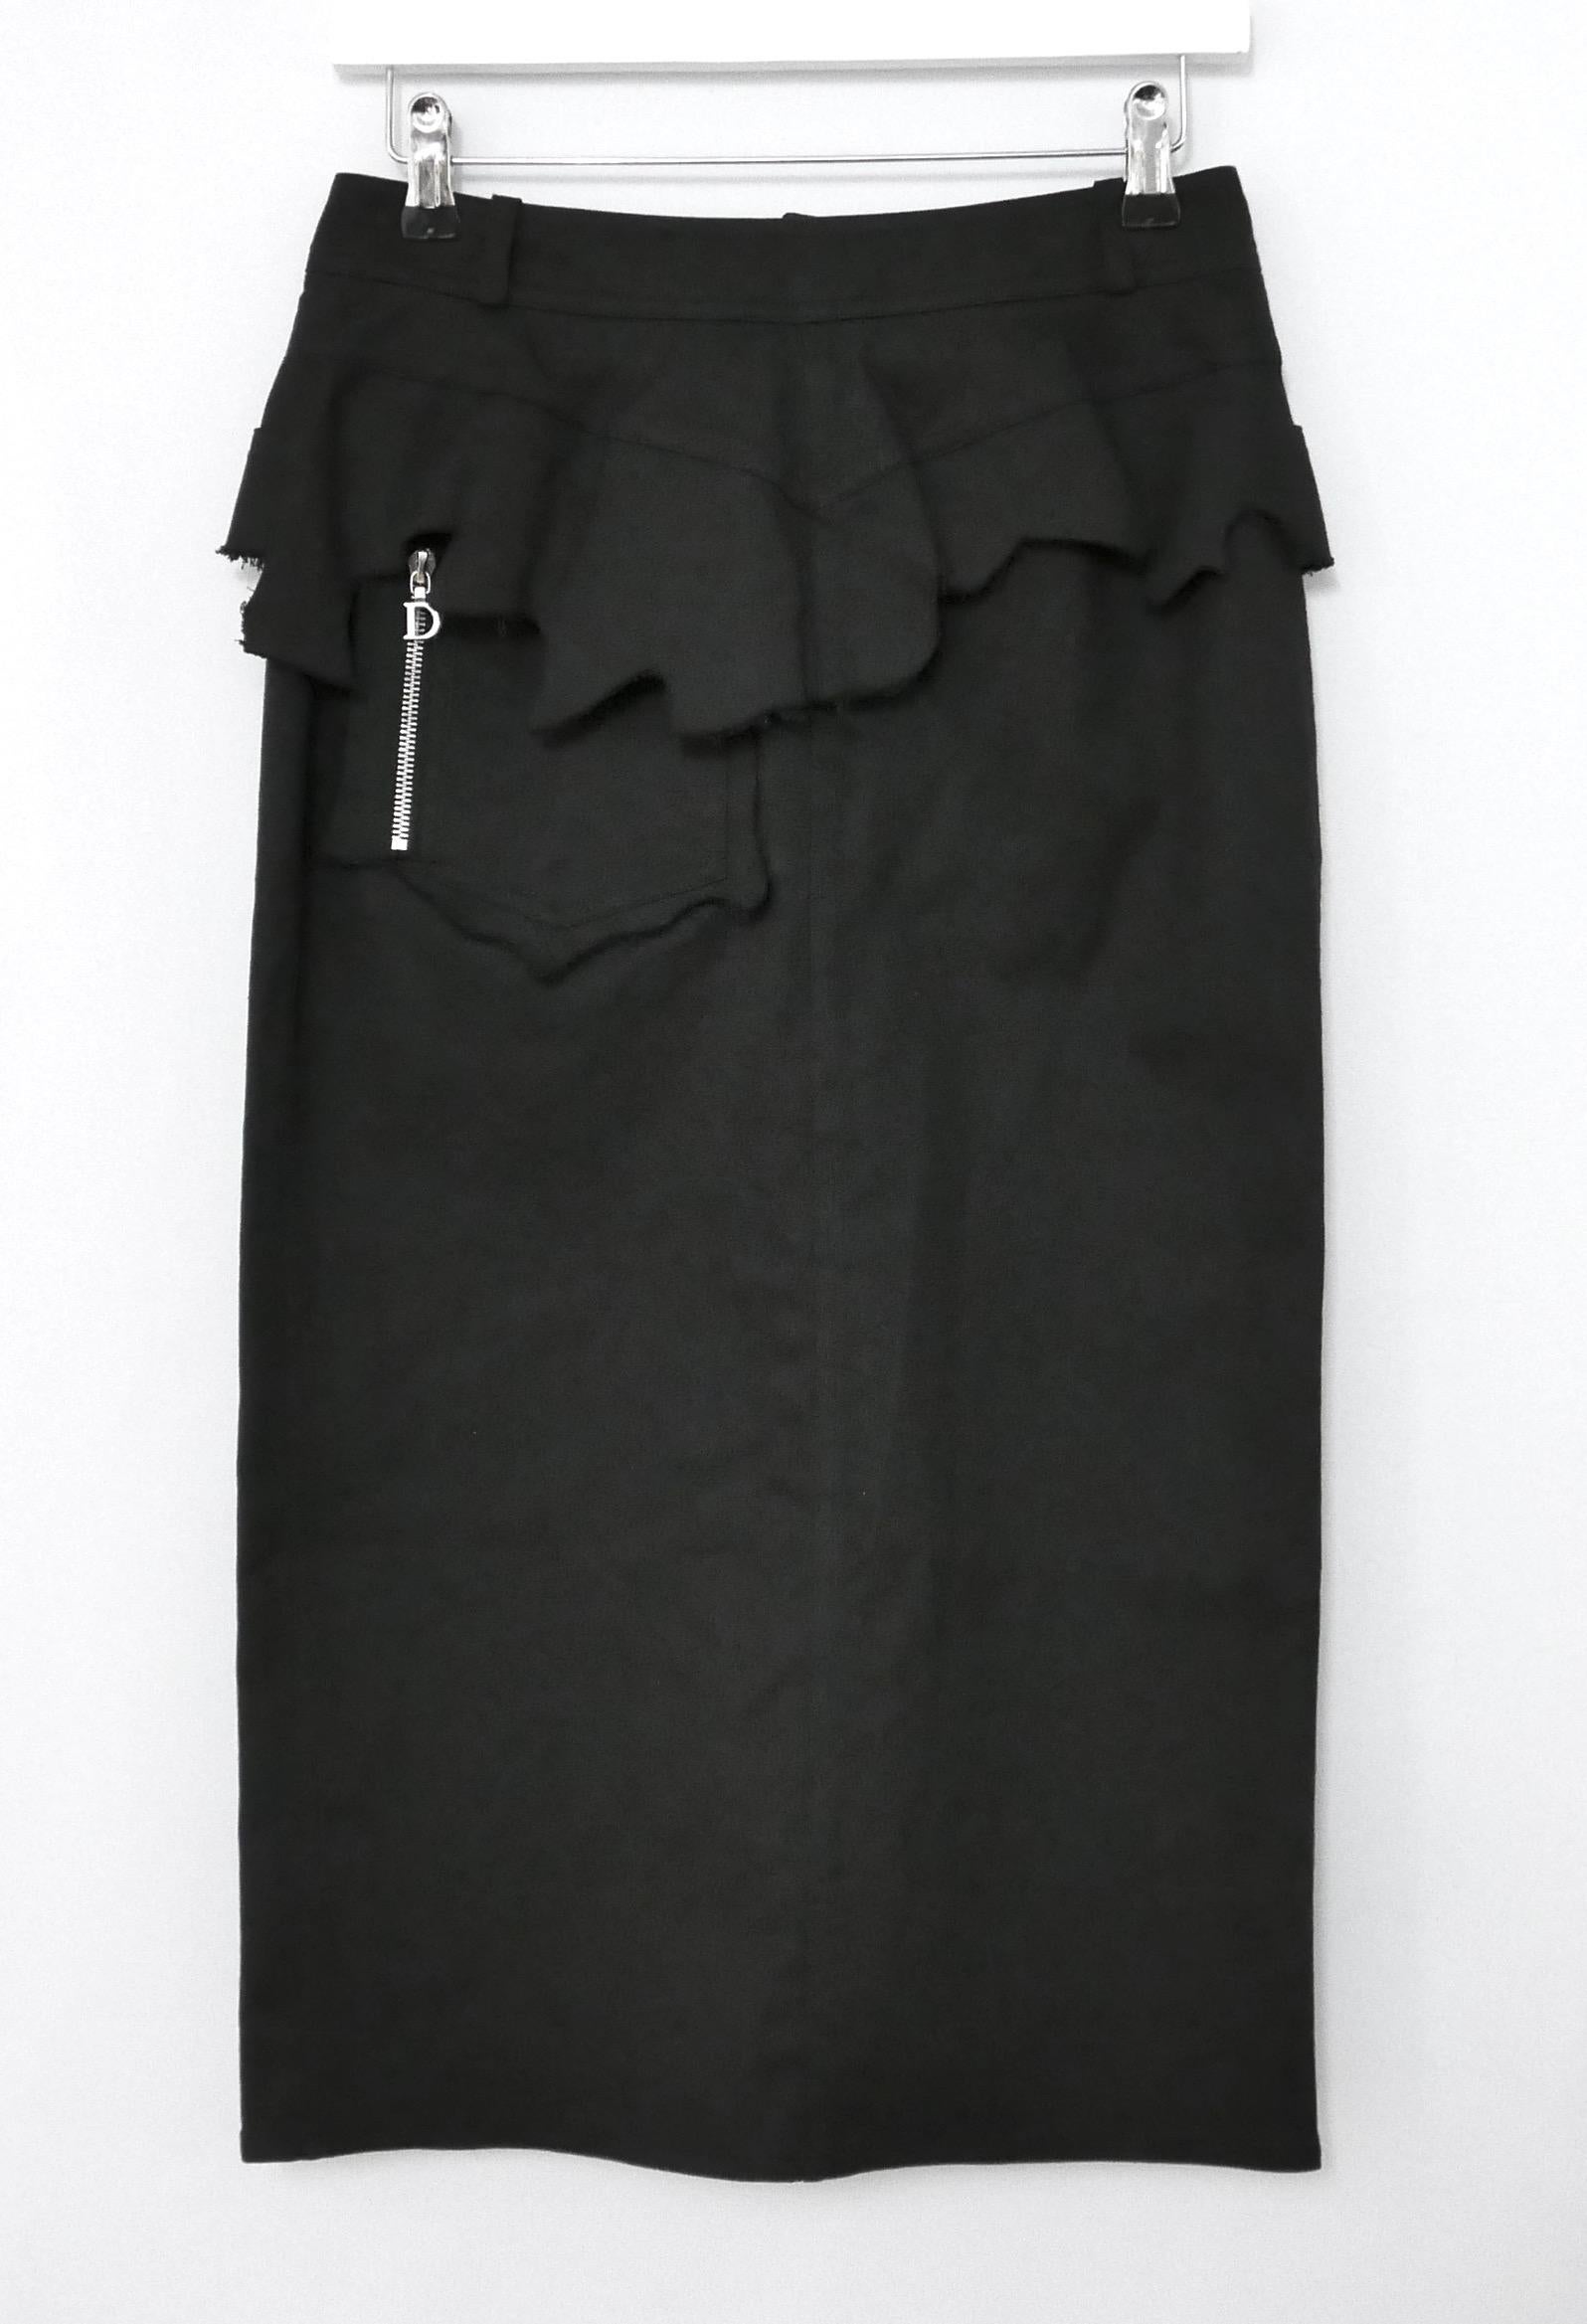 Absolutely amazing, super collectible skirt from John Galliano's Spring 2001 collection for Dior. Unworn. 

Made from black cotton denim with 2% elastane, it has the most fabulous triple layered ripped frill peplum waist. This is fully removable